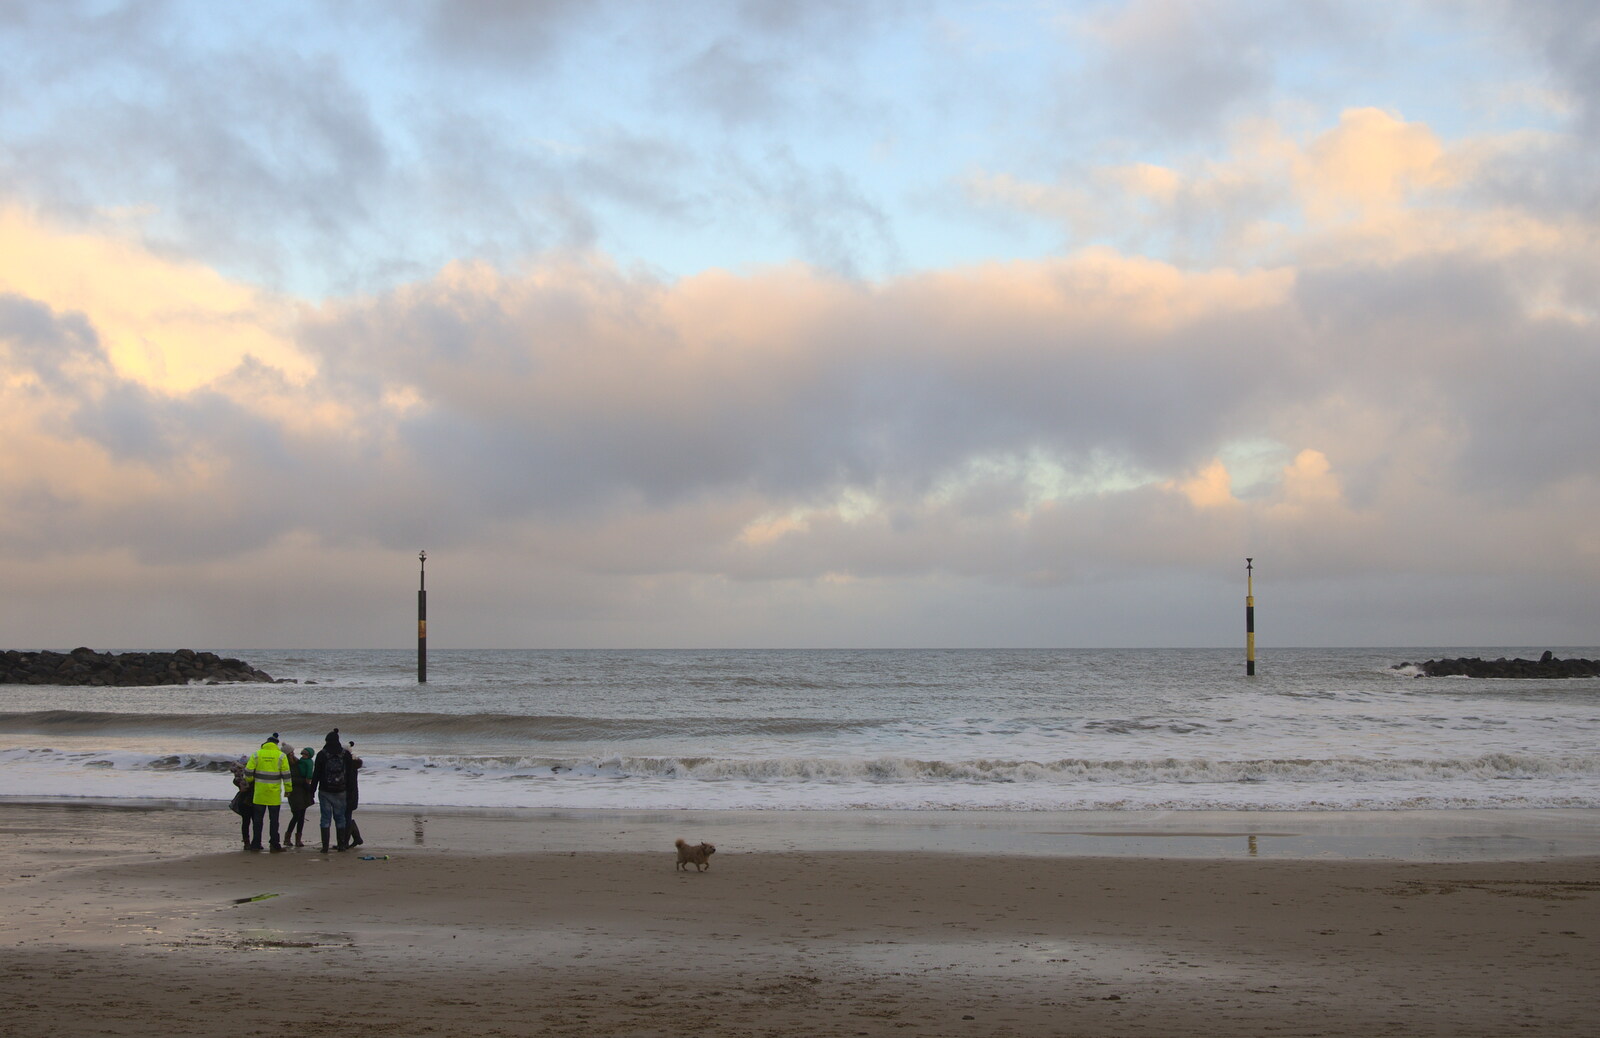 A group of people on the beach from Horsey Seals and Sea Palling, Norfolk Coast - 2nd January 2017